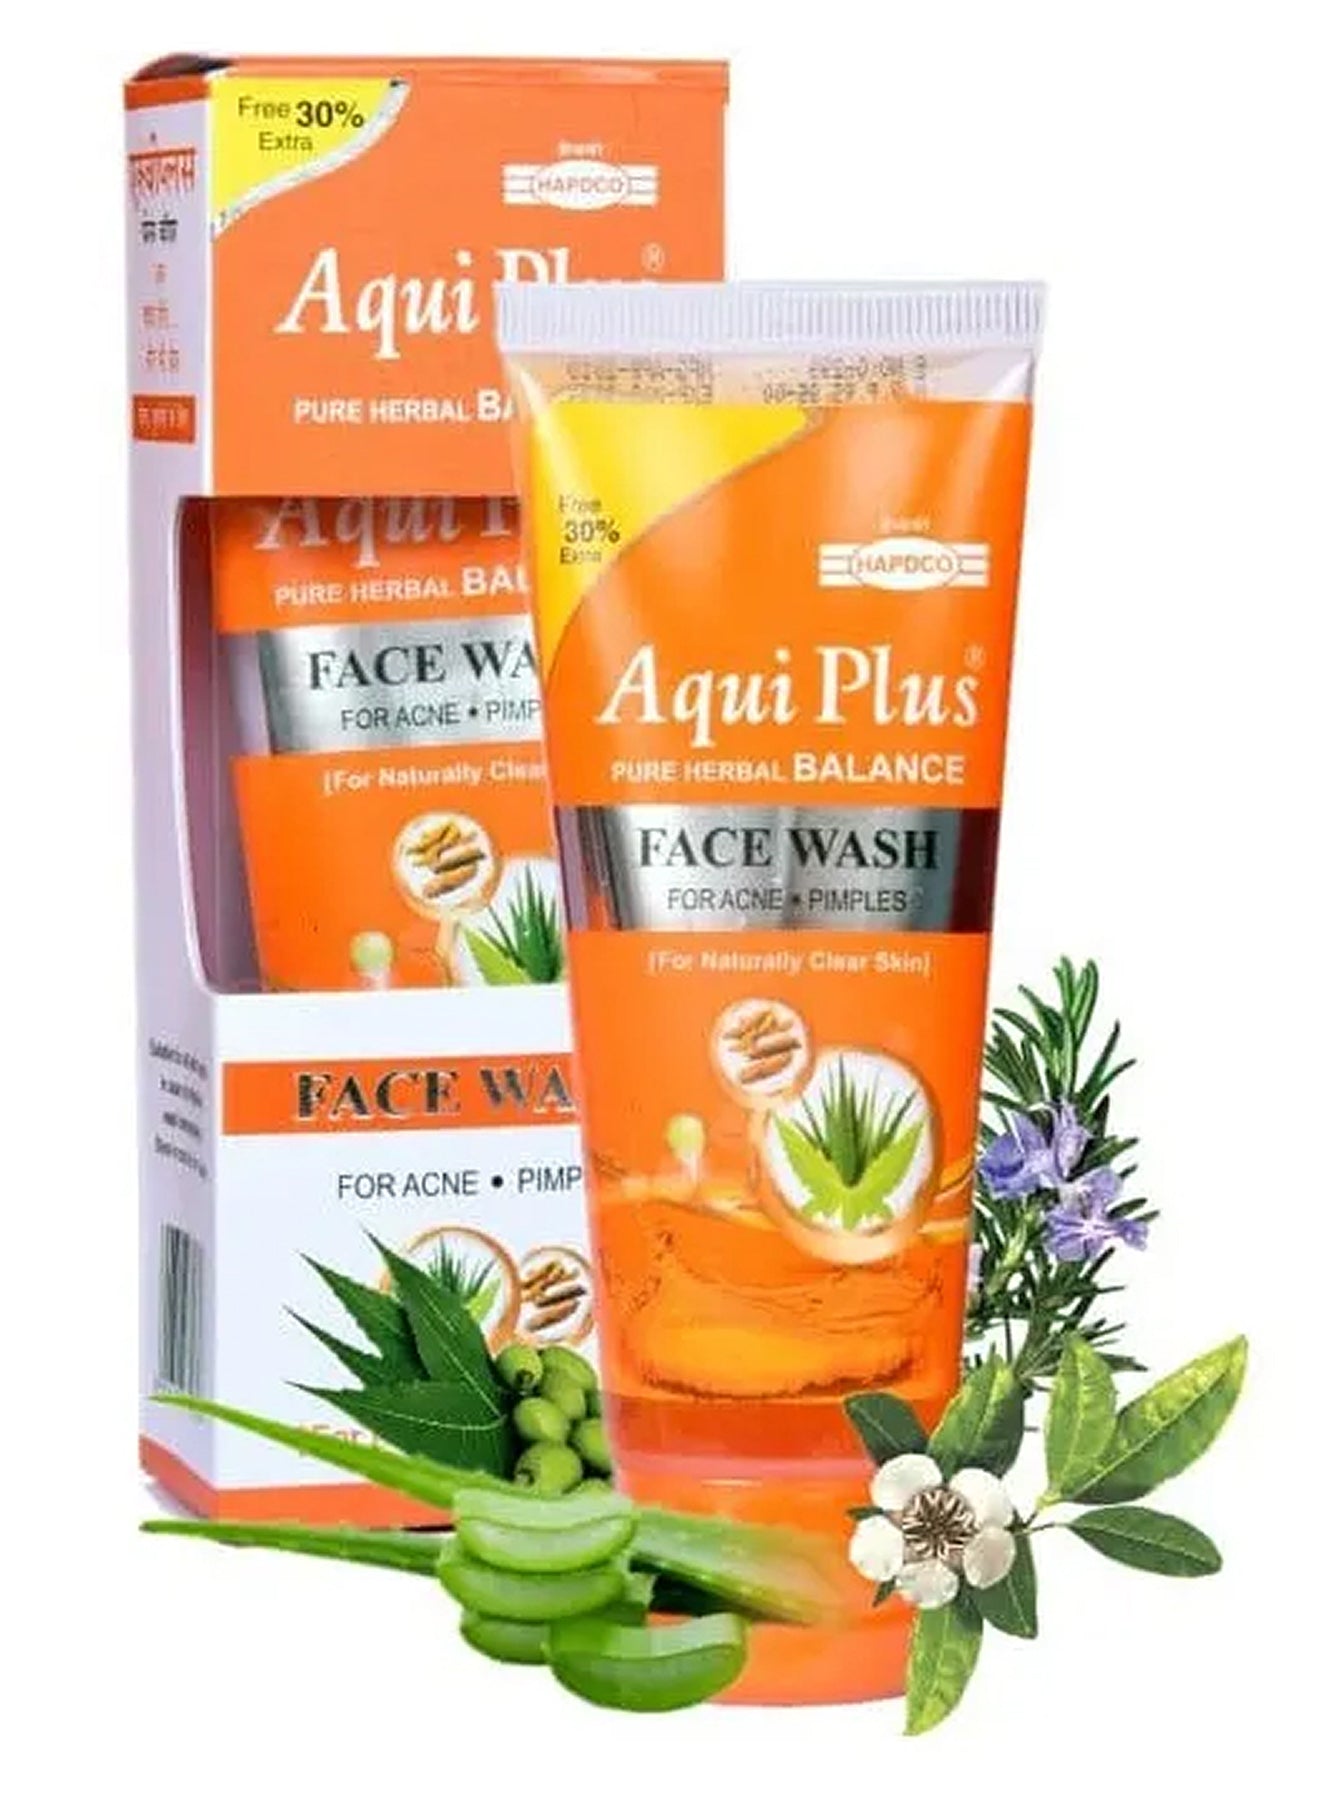 Aqui Plus Pure Herbal Balance For Acne Pimples Face Wash 65 ml Value Pack of 2 